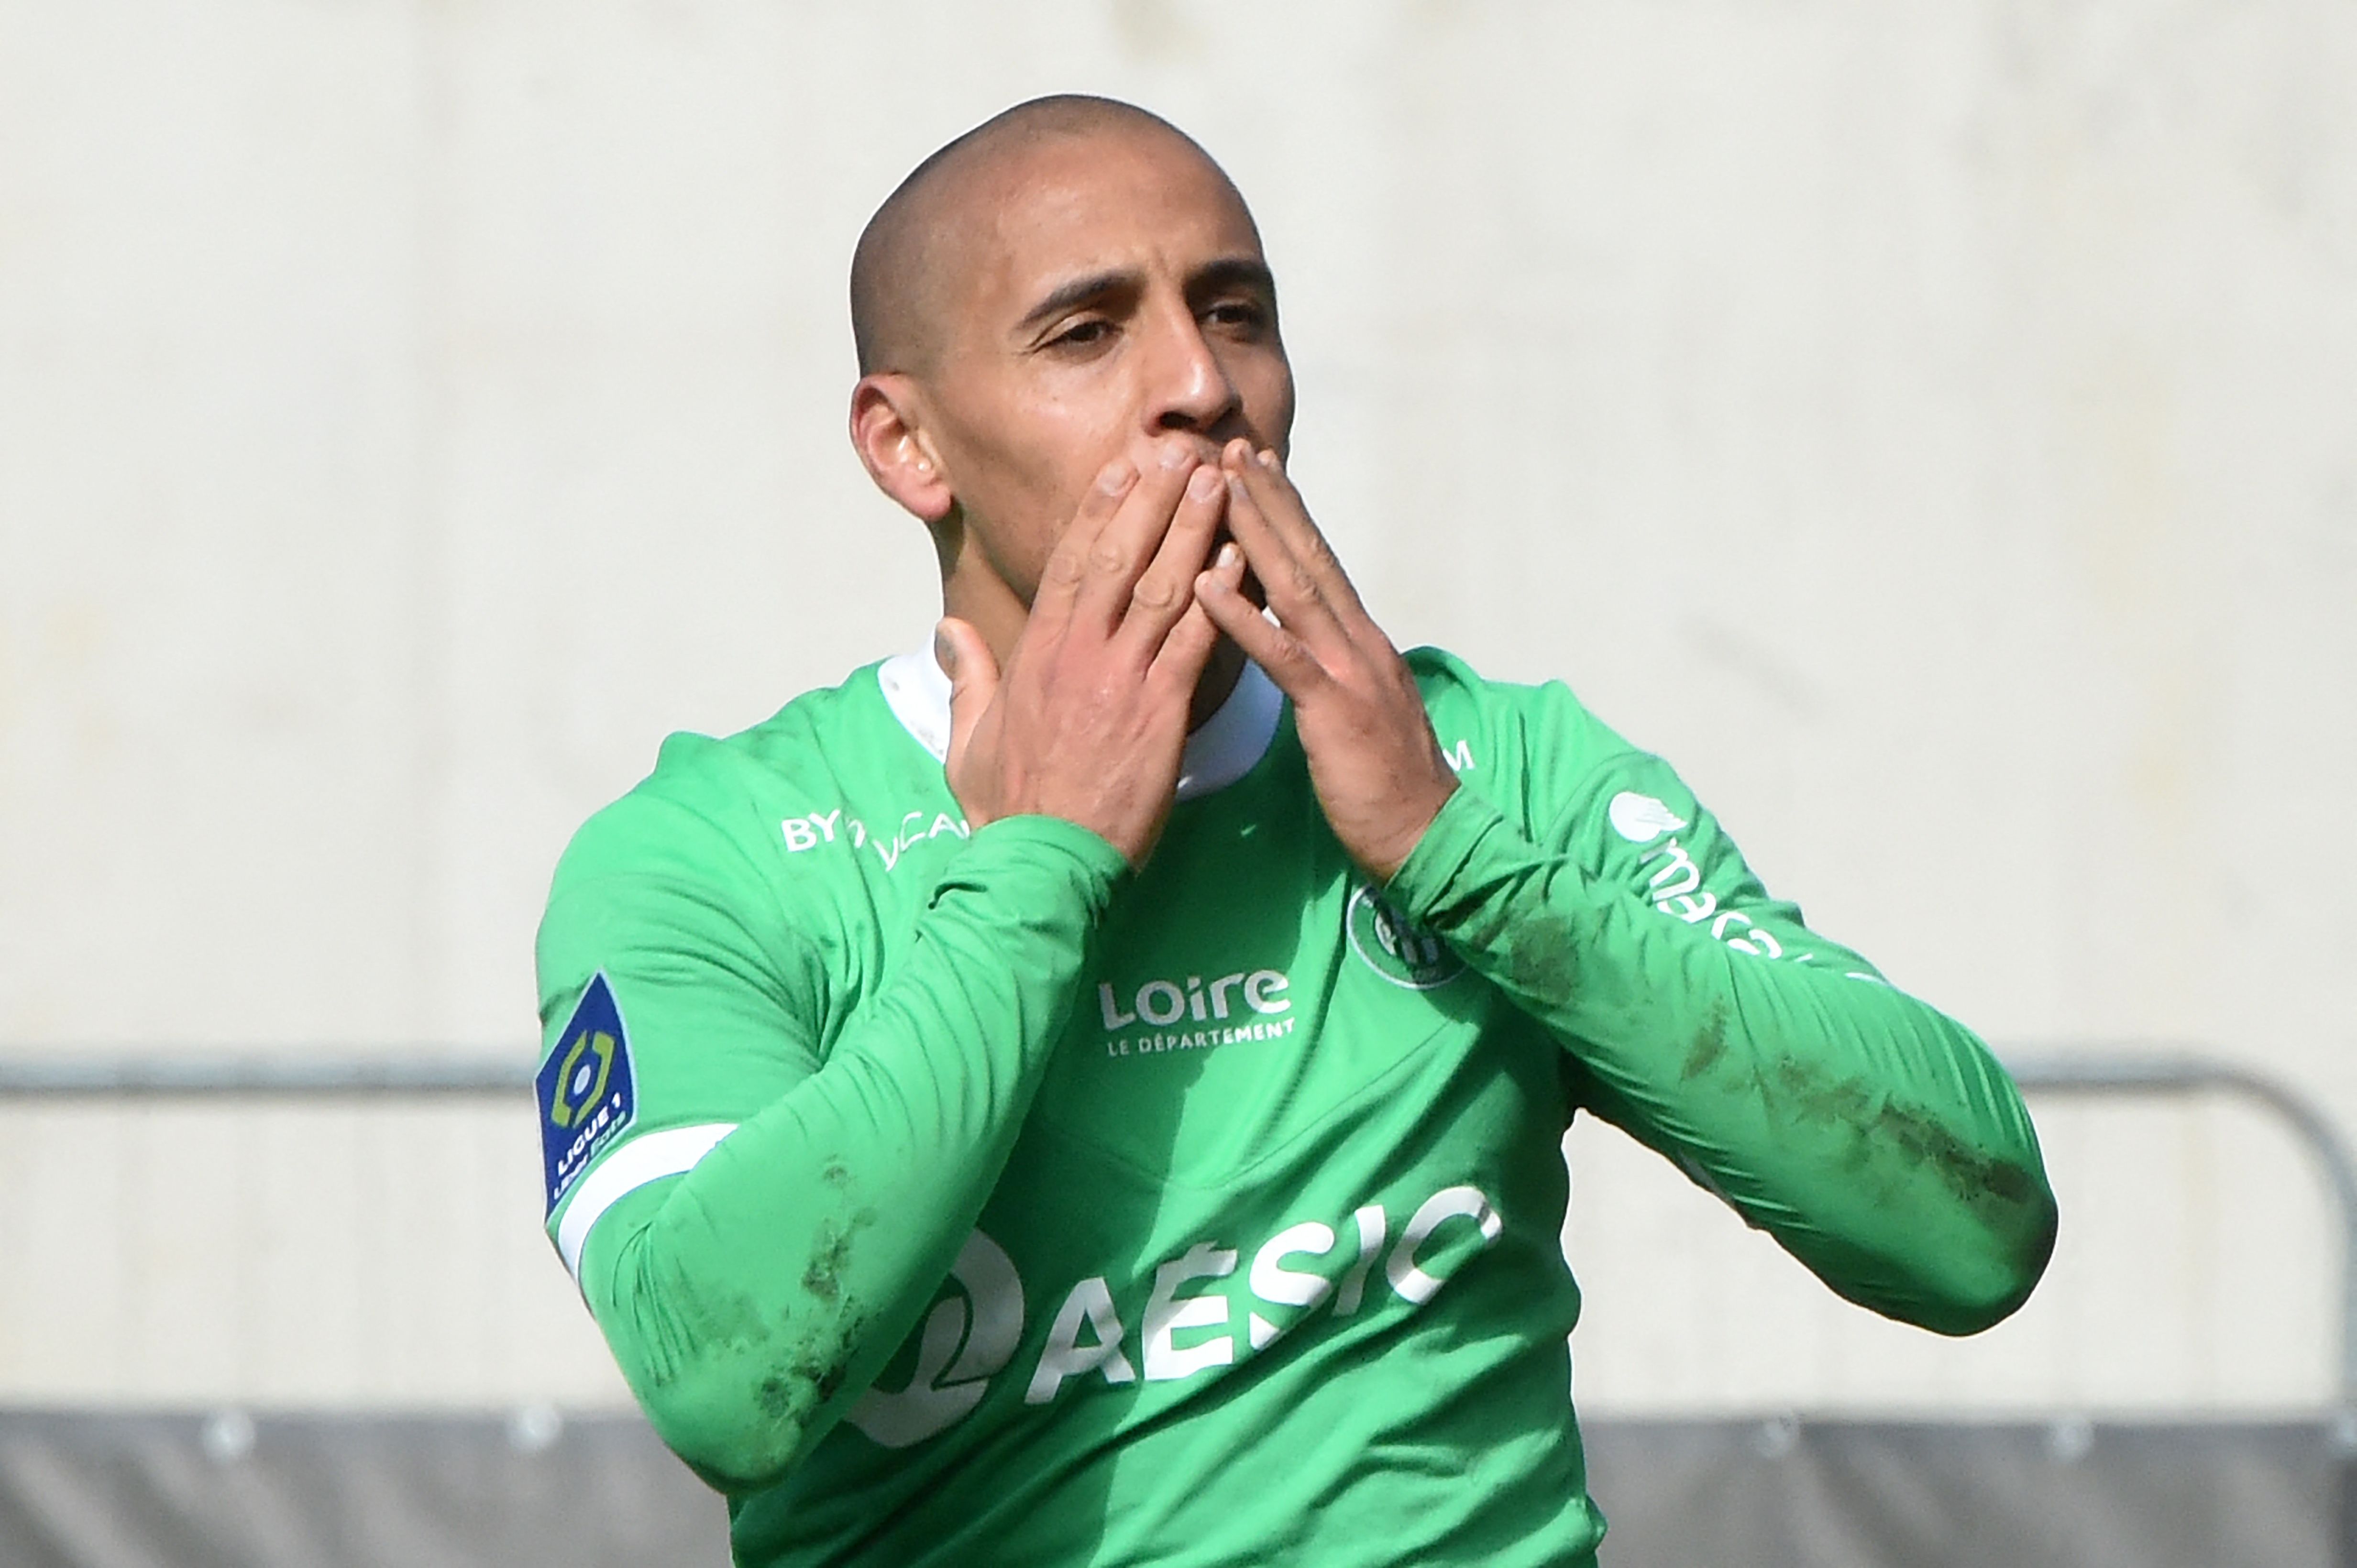 Tunisia captain Khazri powers Saint-Etienne to victory on his return from injury